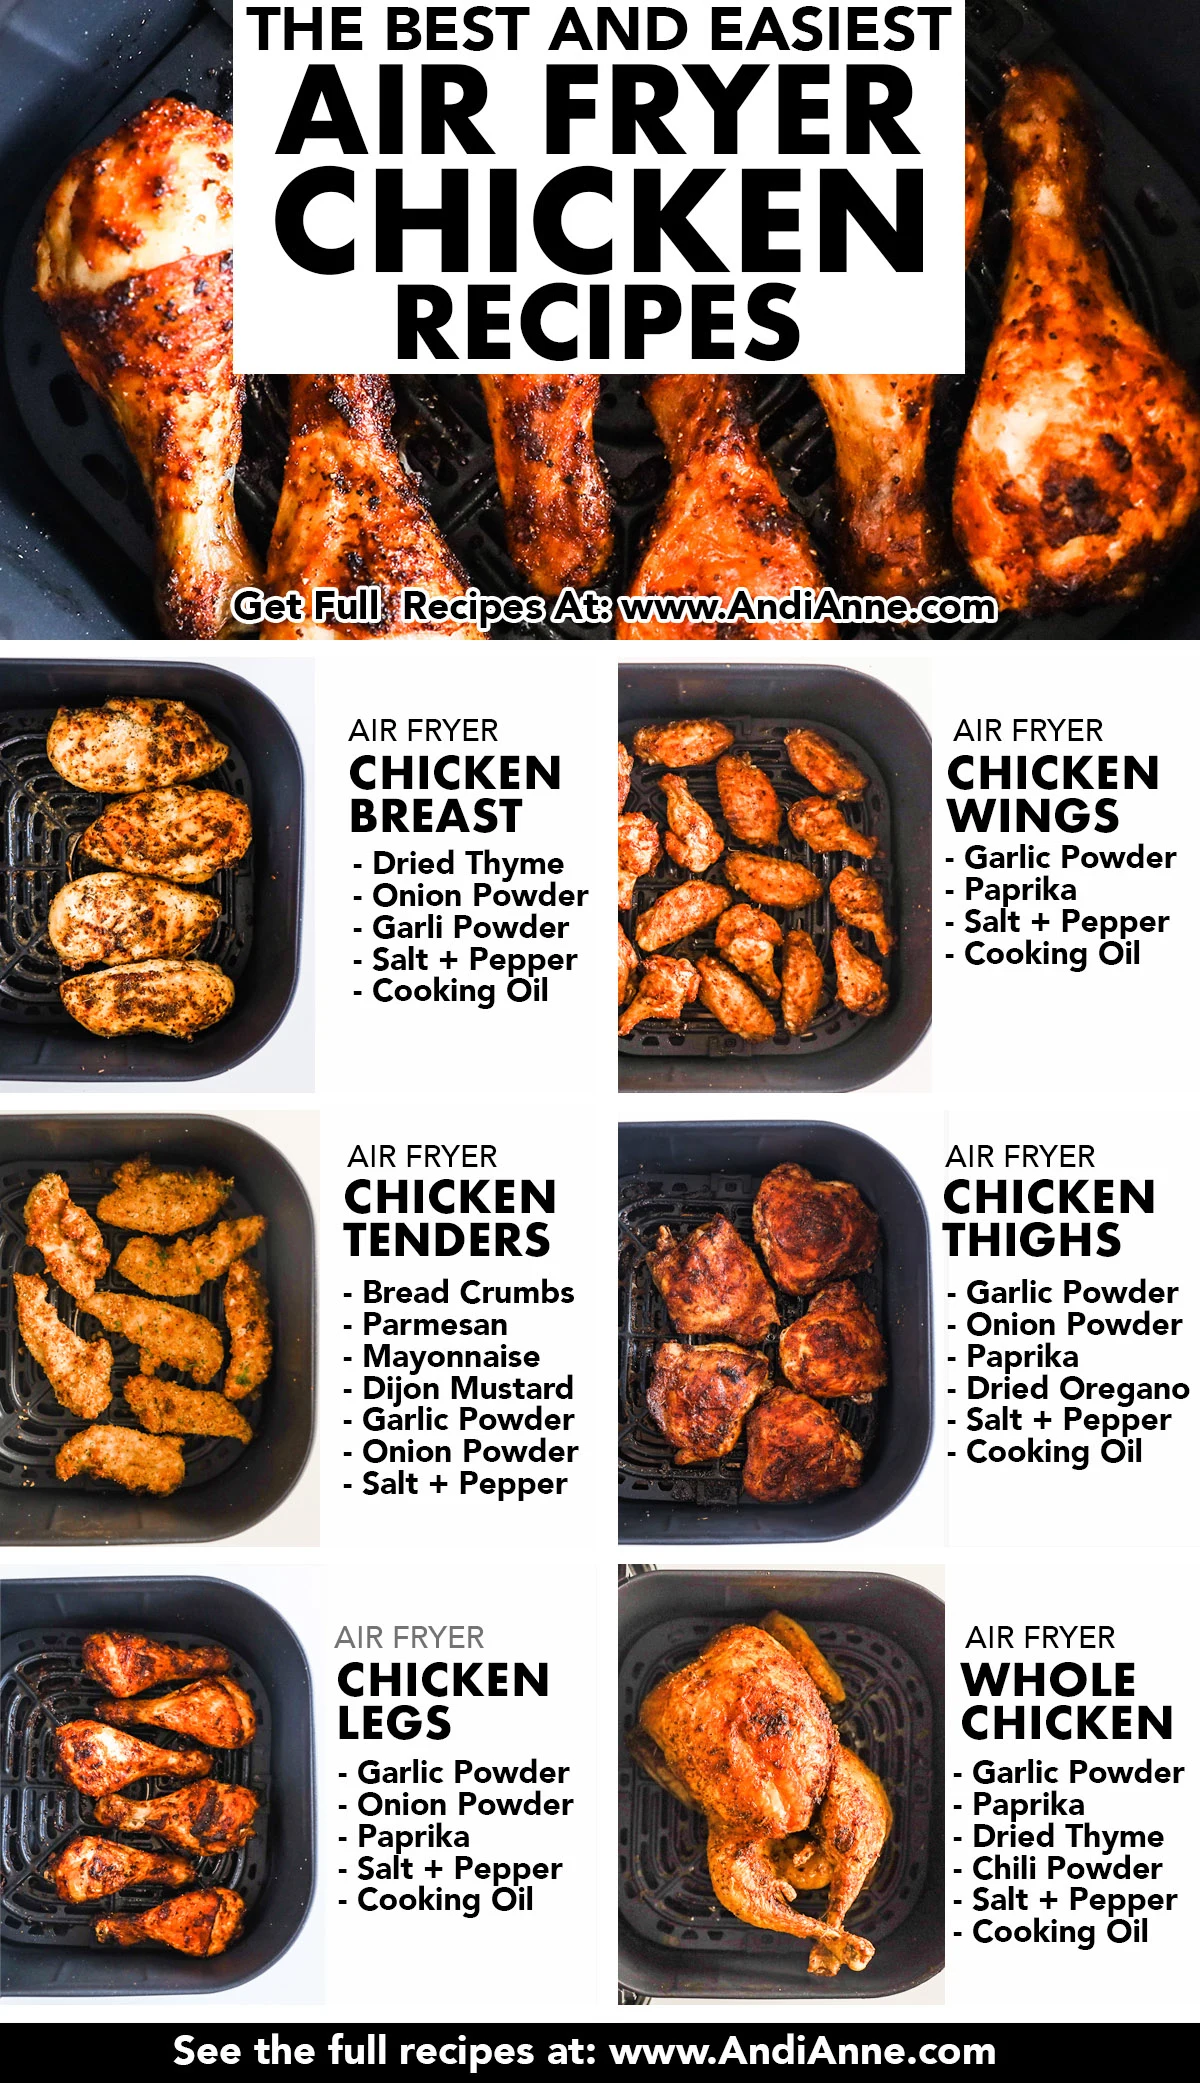 6 air fryer chicken recipes with all images of each chicken cut in an air fryer basket. Includes chicken breast, wingsm tenders, thighs, legs and whole chicken. All have spices and oil ingredients listed by each image.